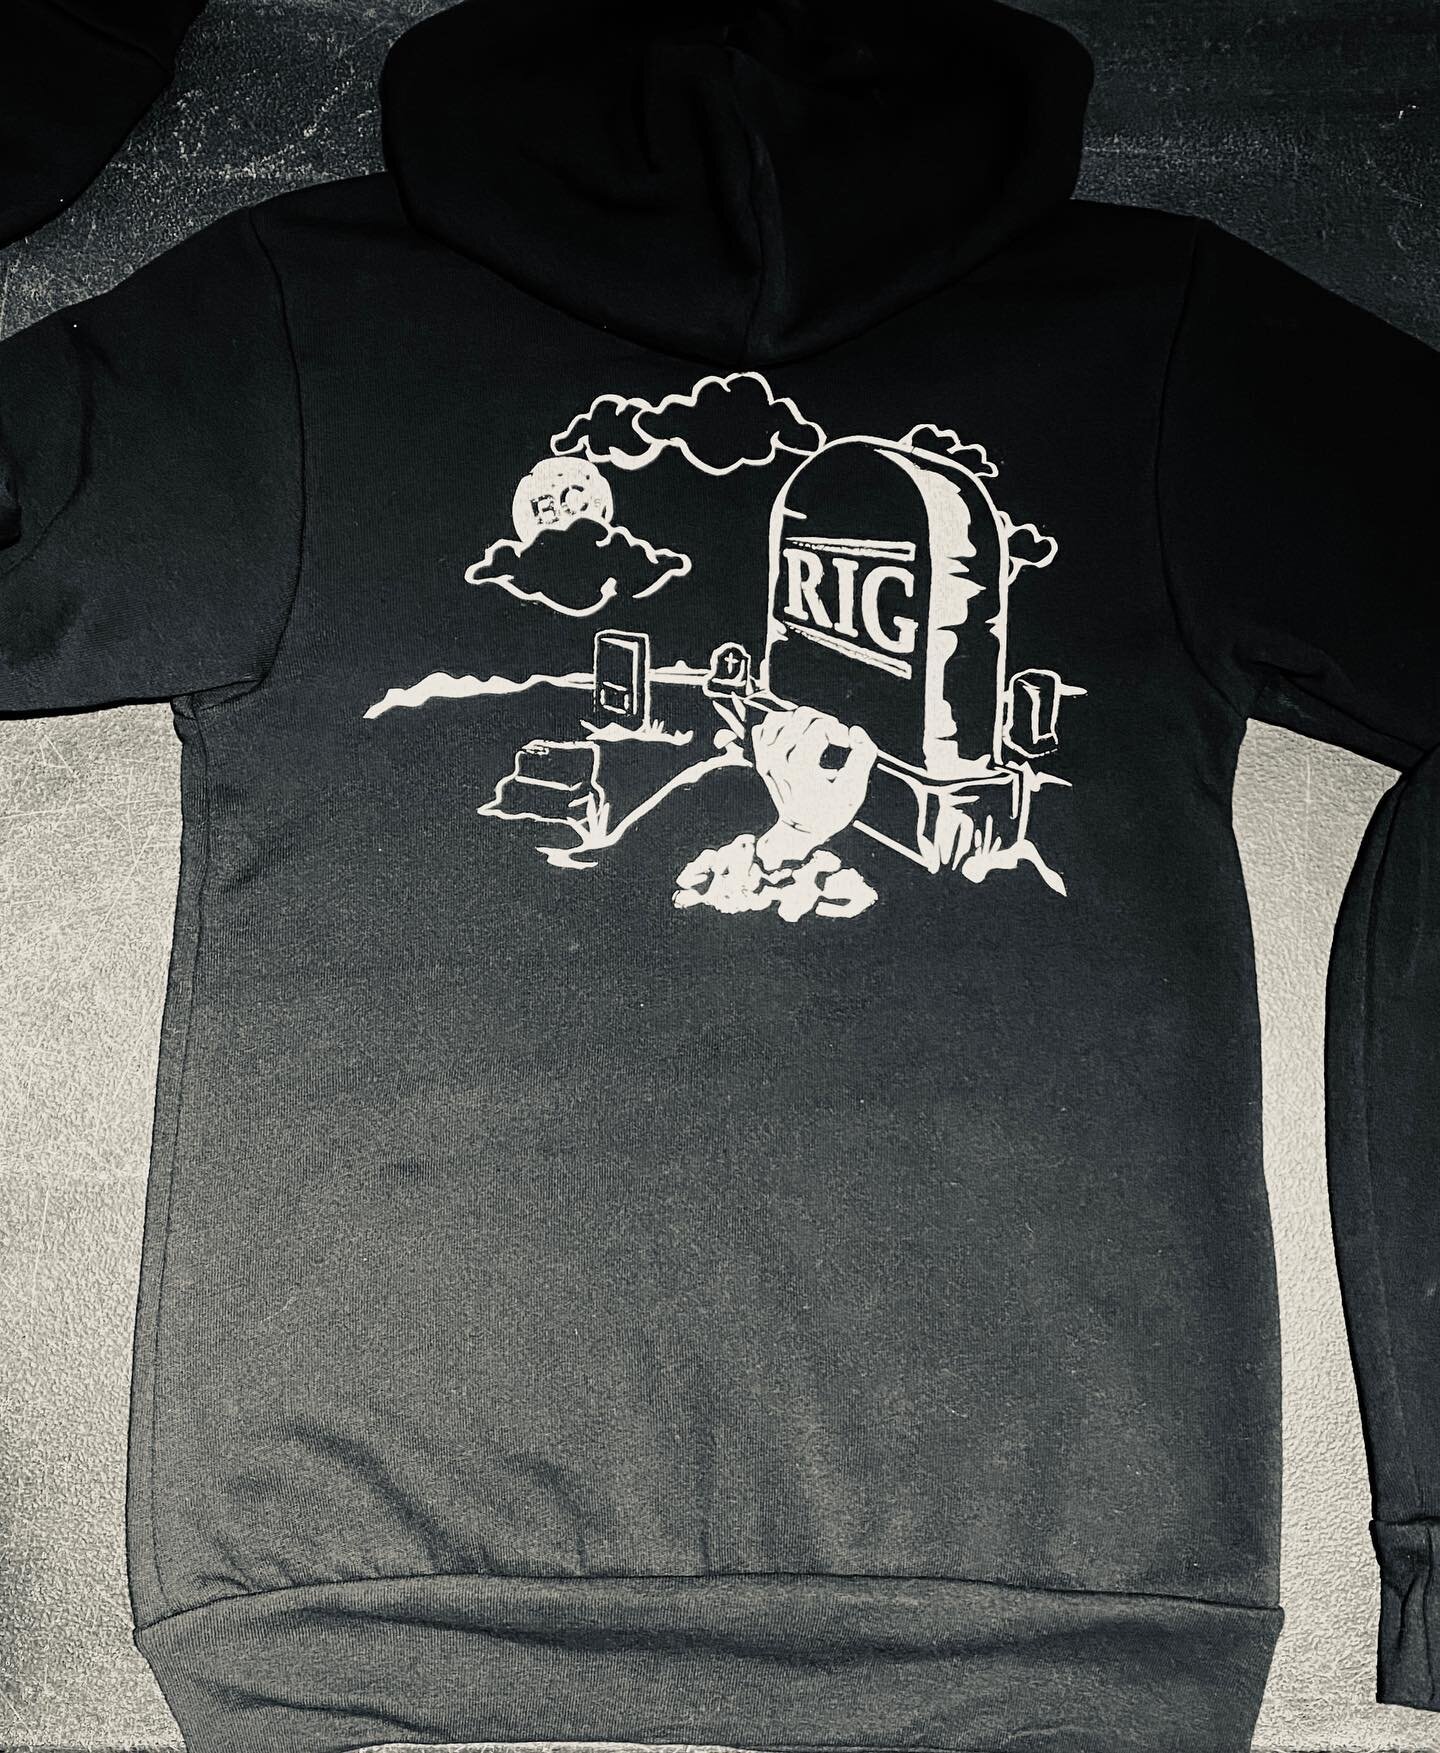 Introducing &lsquo;Part Two&rsquo; of our Spotting and Plotting Hoody&hellip;(Triptych&hellip;?)
.
.
The R.I.G. Hoody. The Rigsurrection. 
.
.
Just in time for the autumnal vibe.
.
.
We also have new stock in the original Spotting and Plotting Hoody 